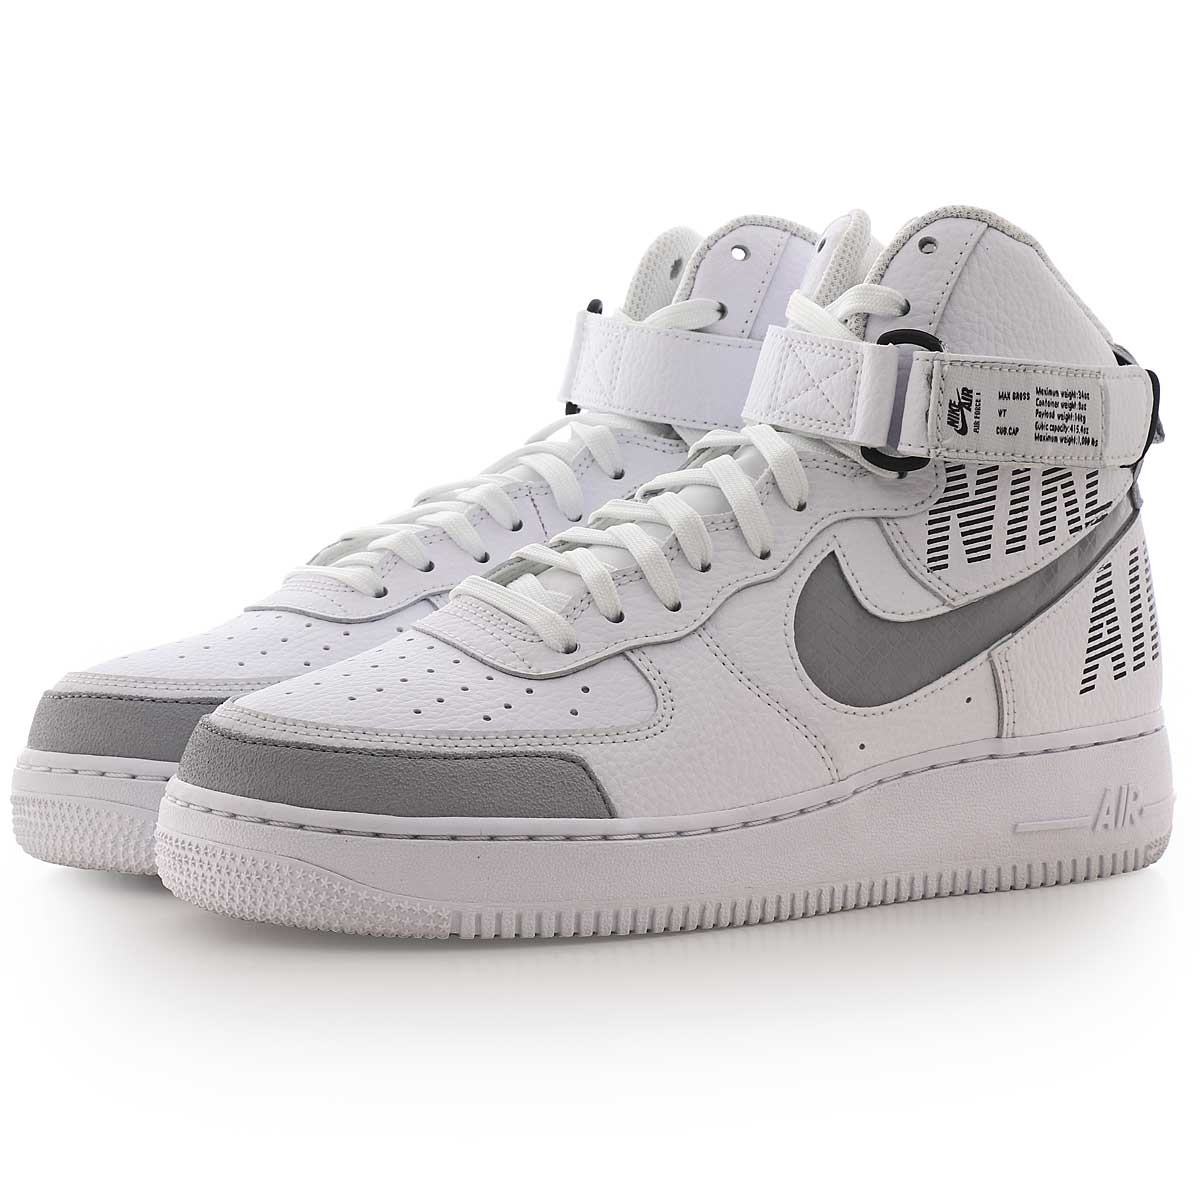 Nike Air Force 1 High '07 Lv8 2 Sneakers In White